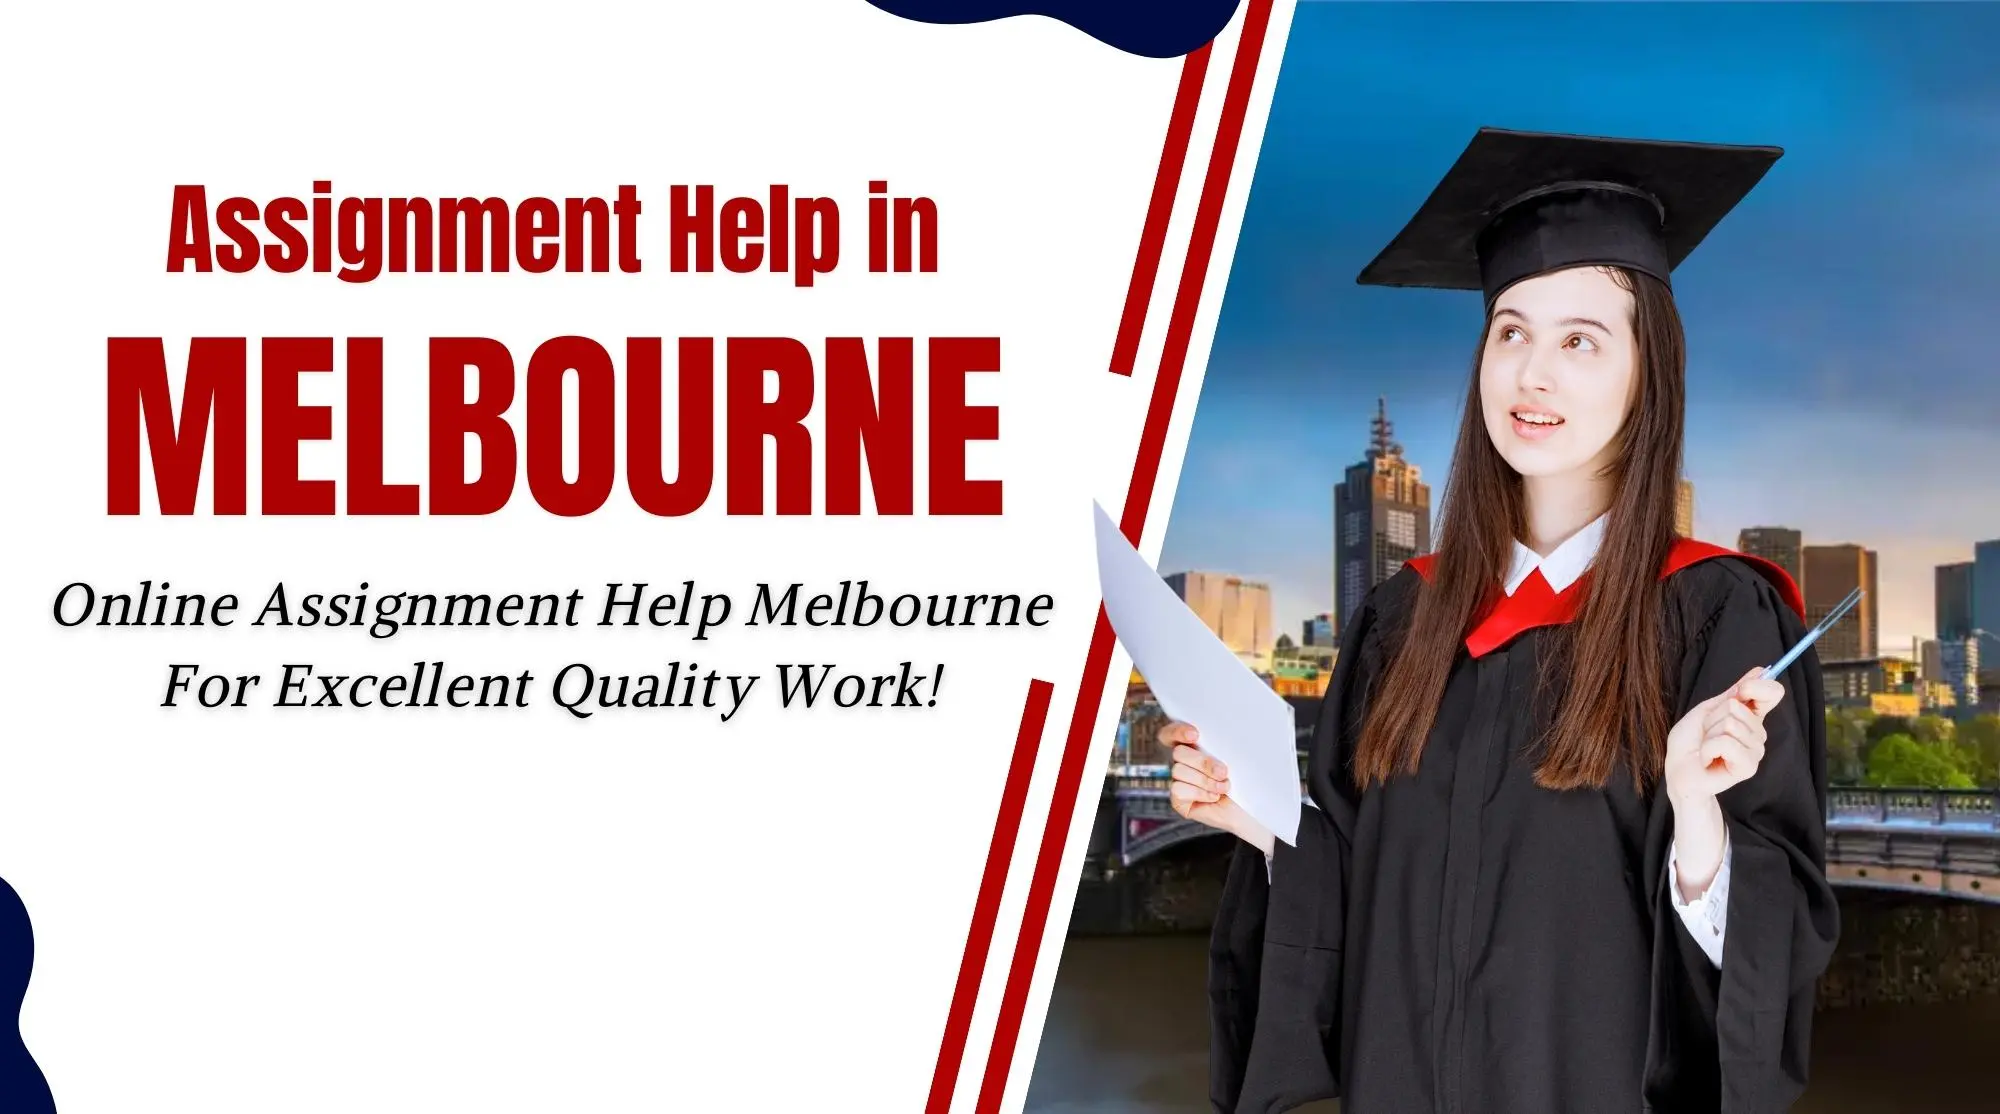 Assignment Help Melbourne at VAH - Get Excellent Quality Work